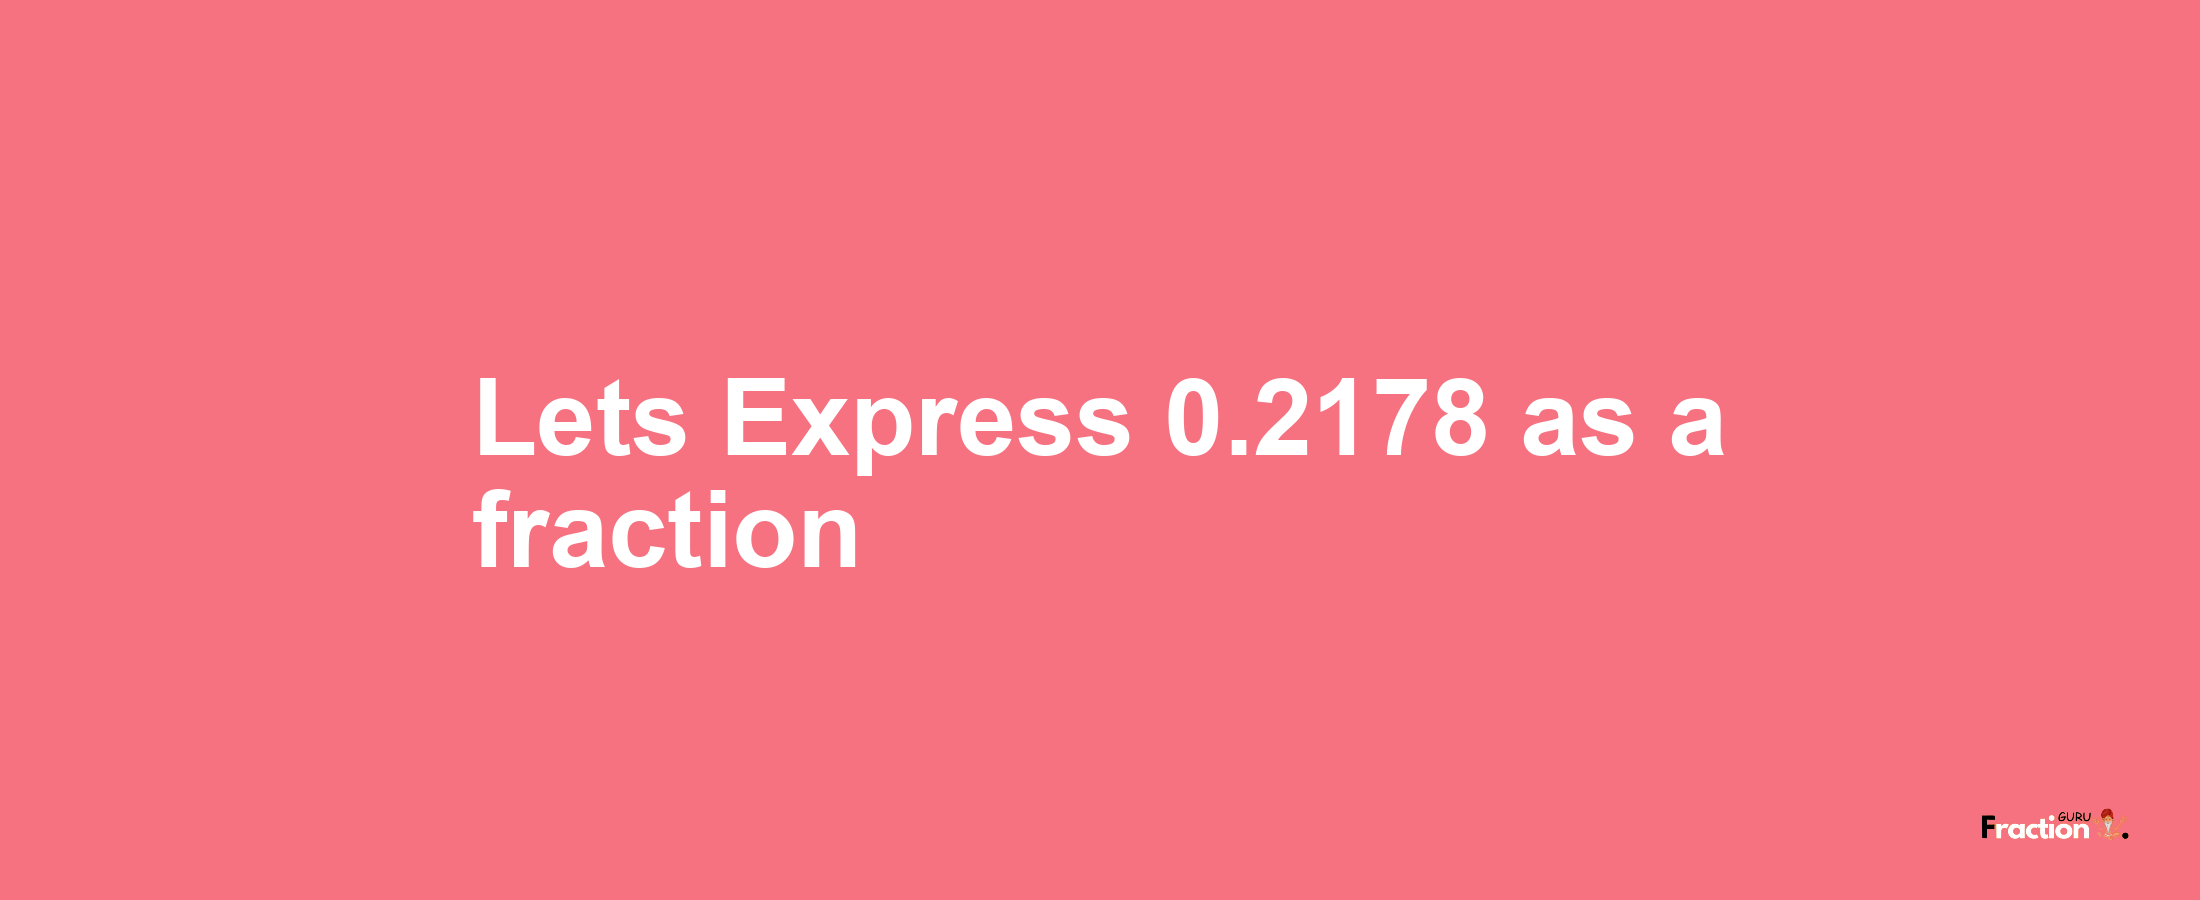 Lets Express 0.2178 as afraction